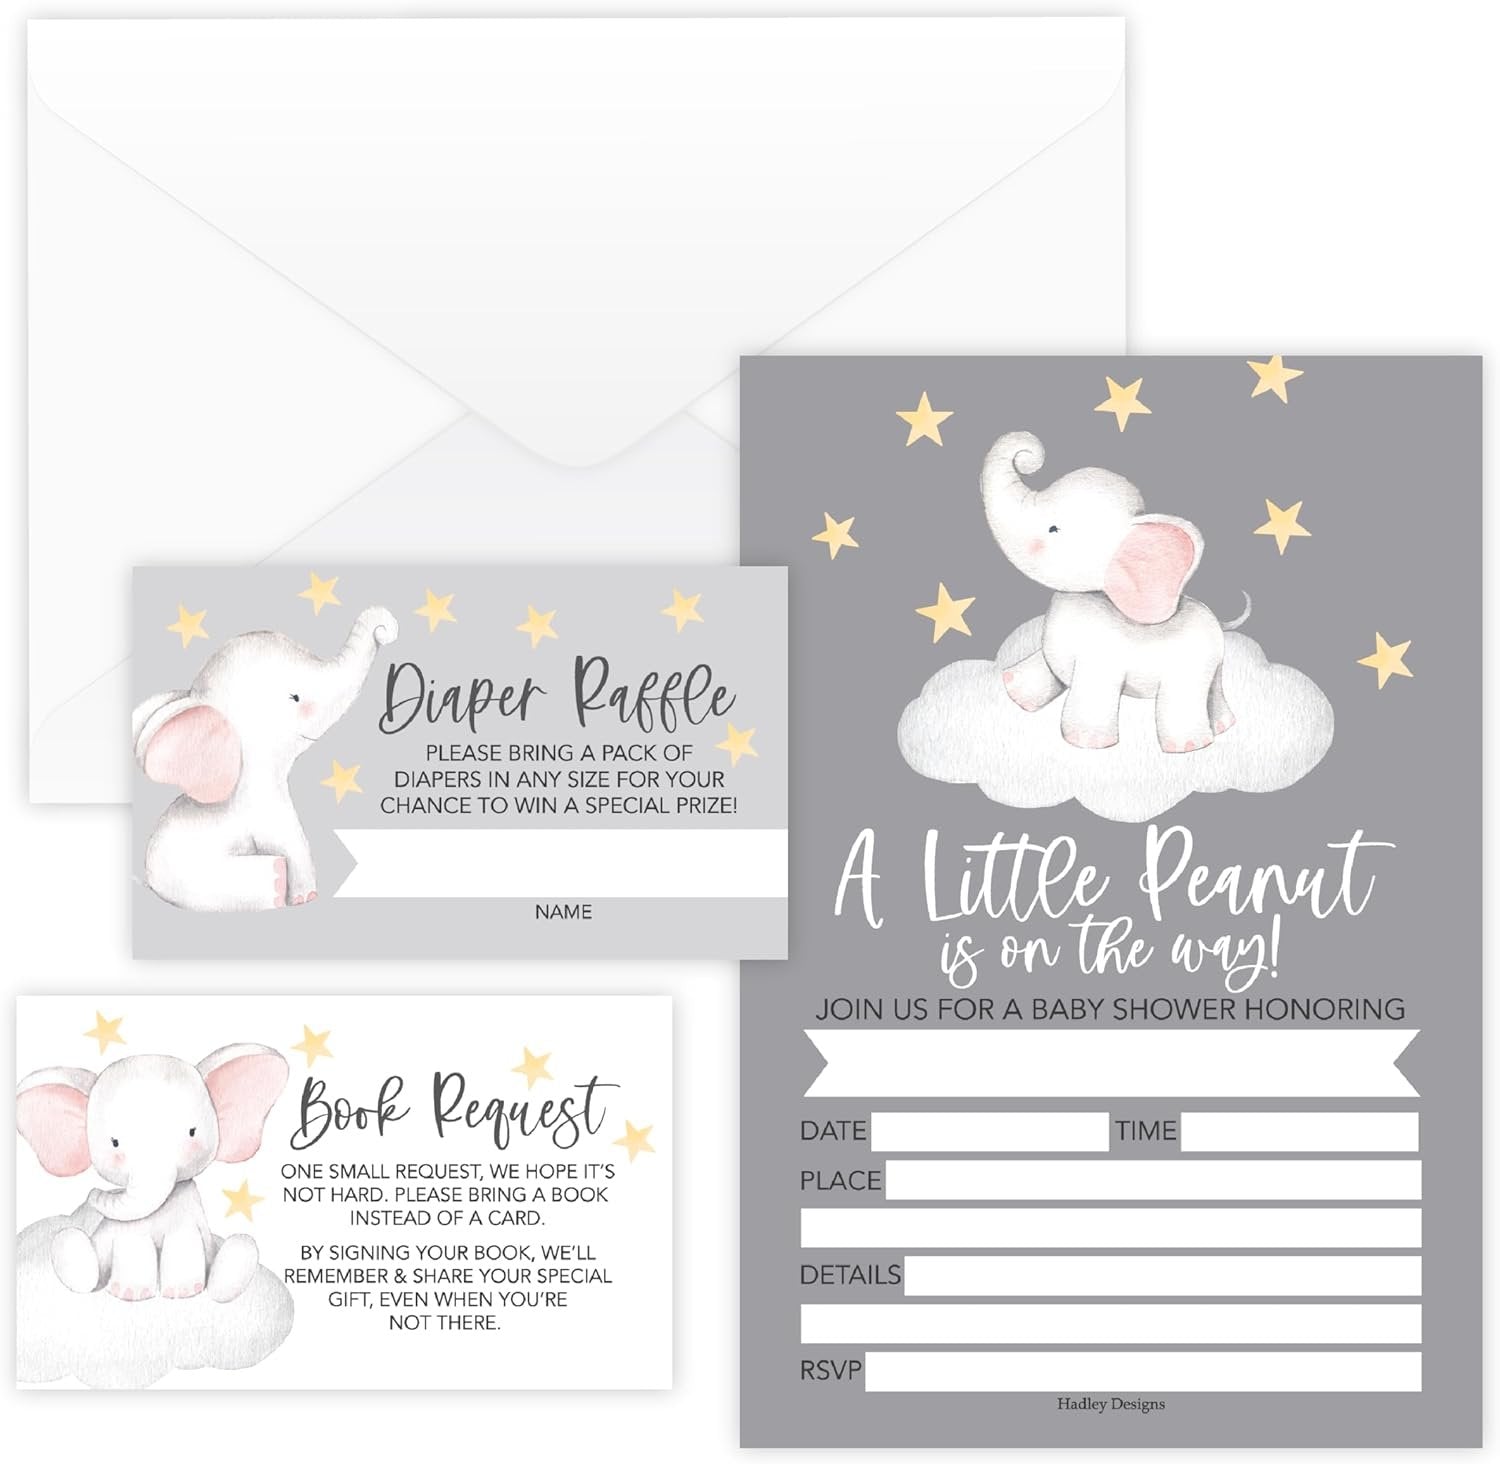 Baby Shower Invitations Shop by Theme | Elephant Neutral